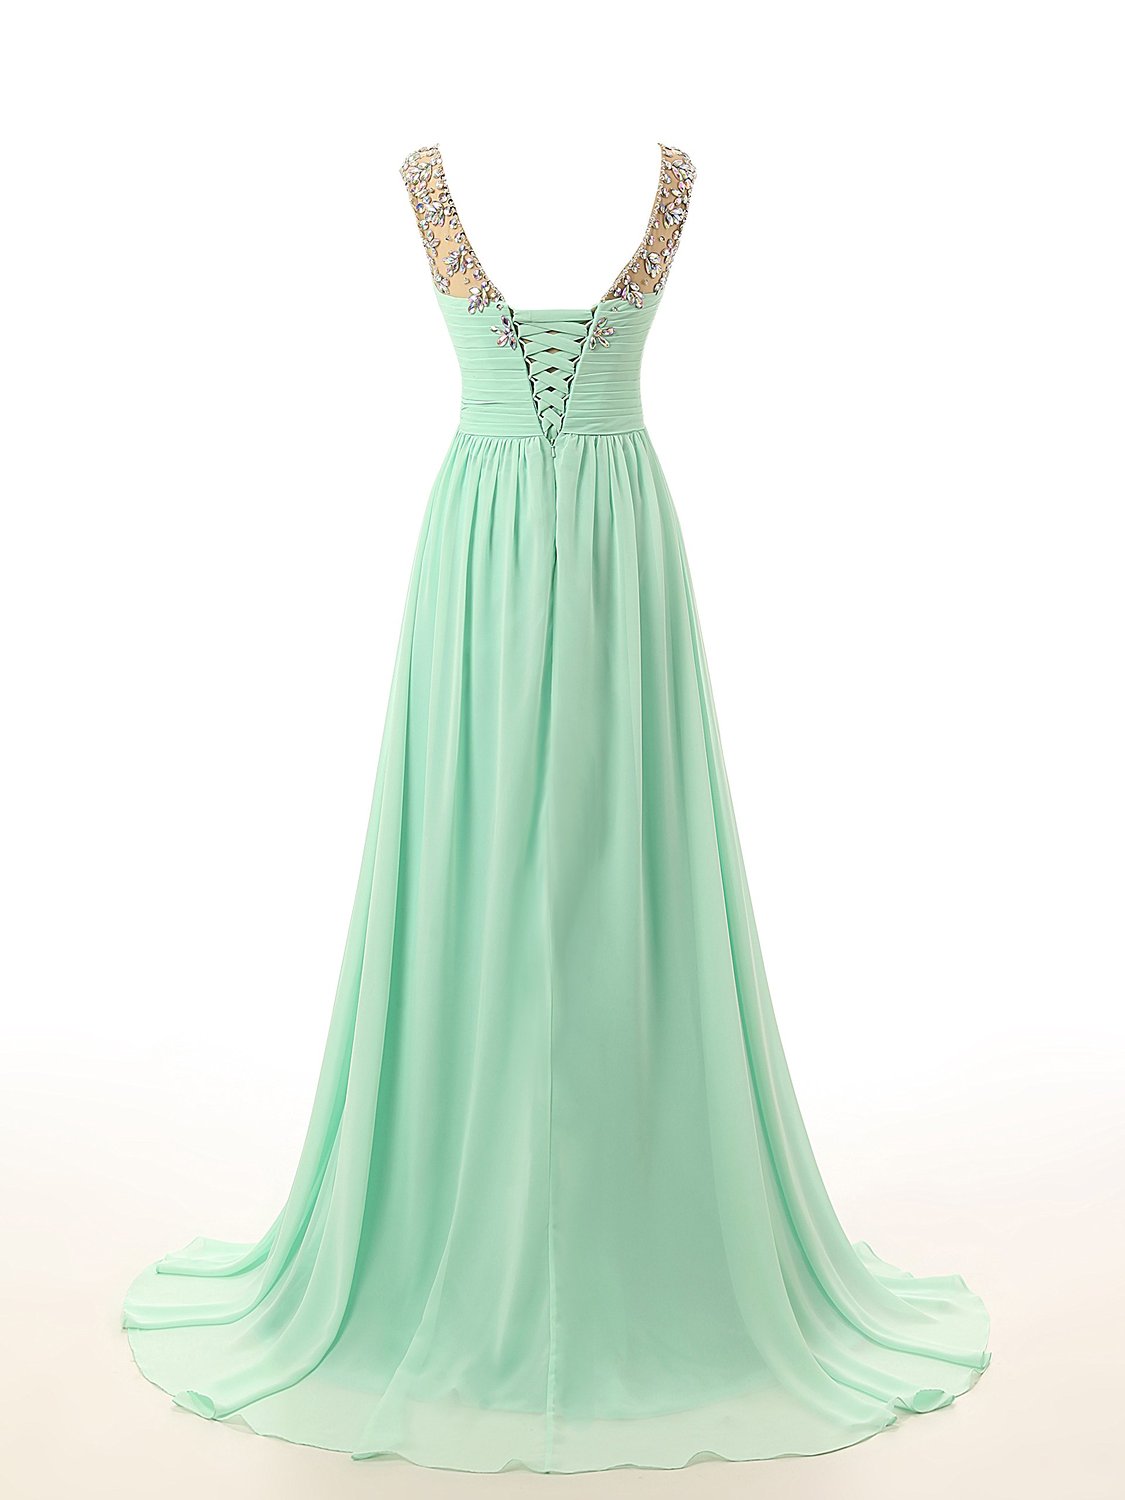 Women's Sparkling Embellished Bridesmaid Prom Ball Evening Dresses C165 ...